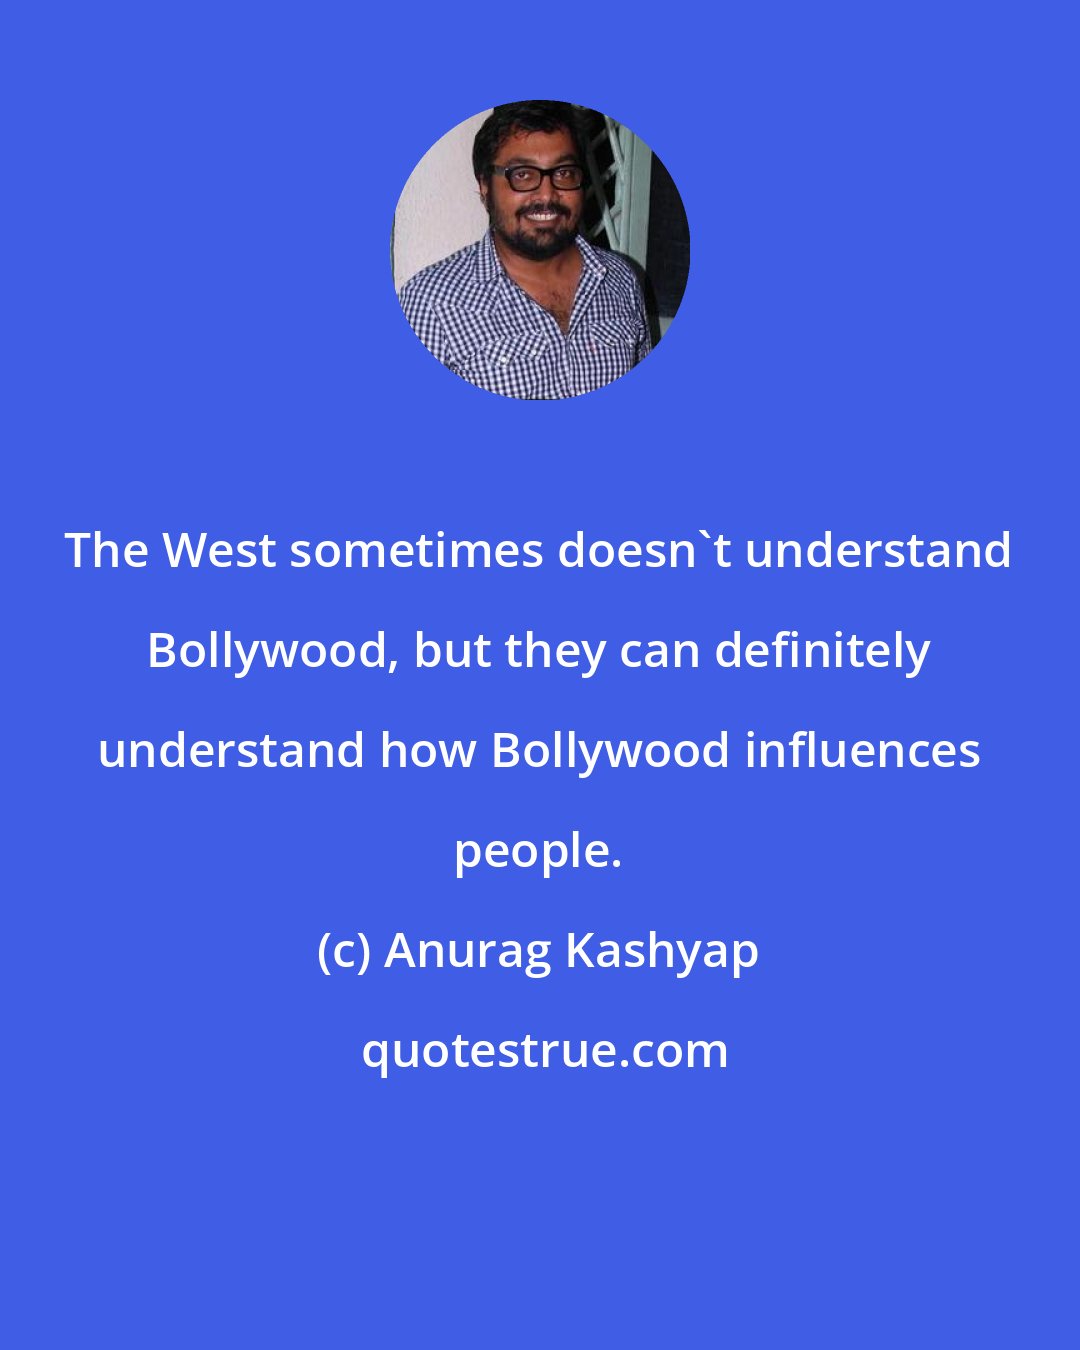 Anurag Kashyap: The West sometimes doesn't understand Bollywood, but they can definitely understand how Bollywood influences people.